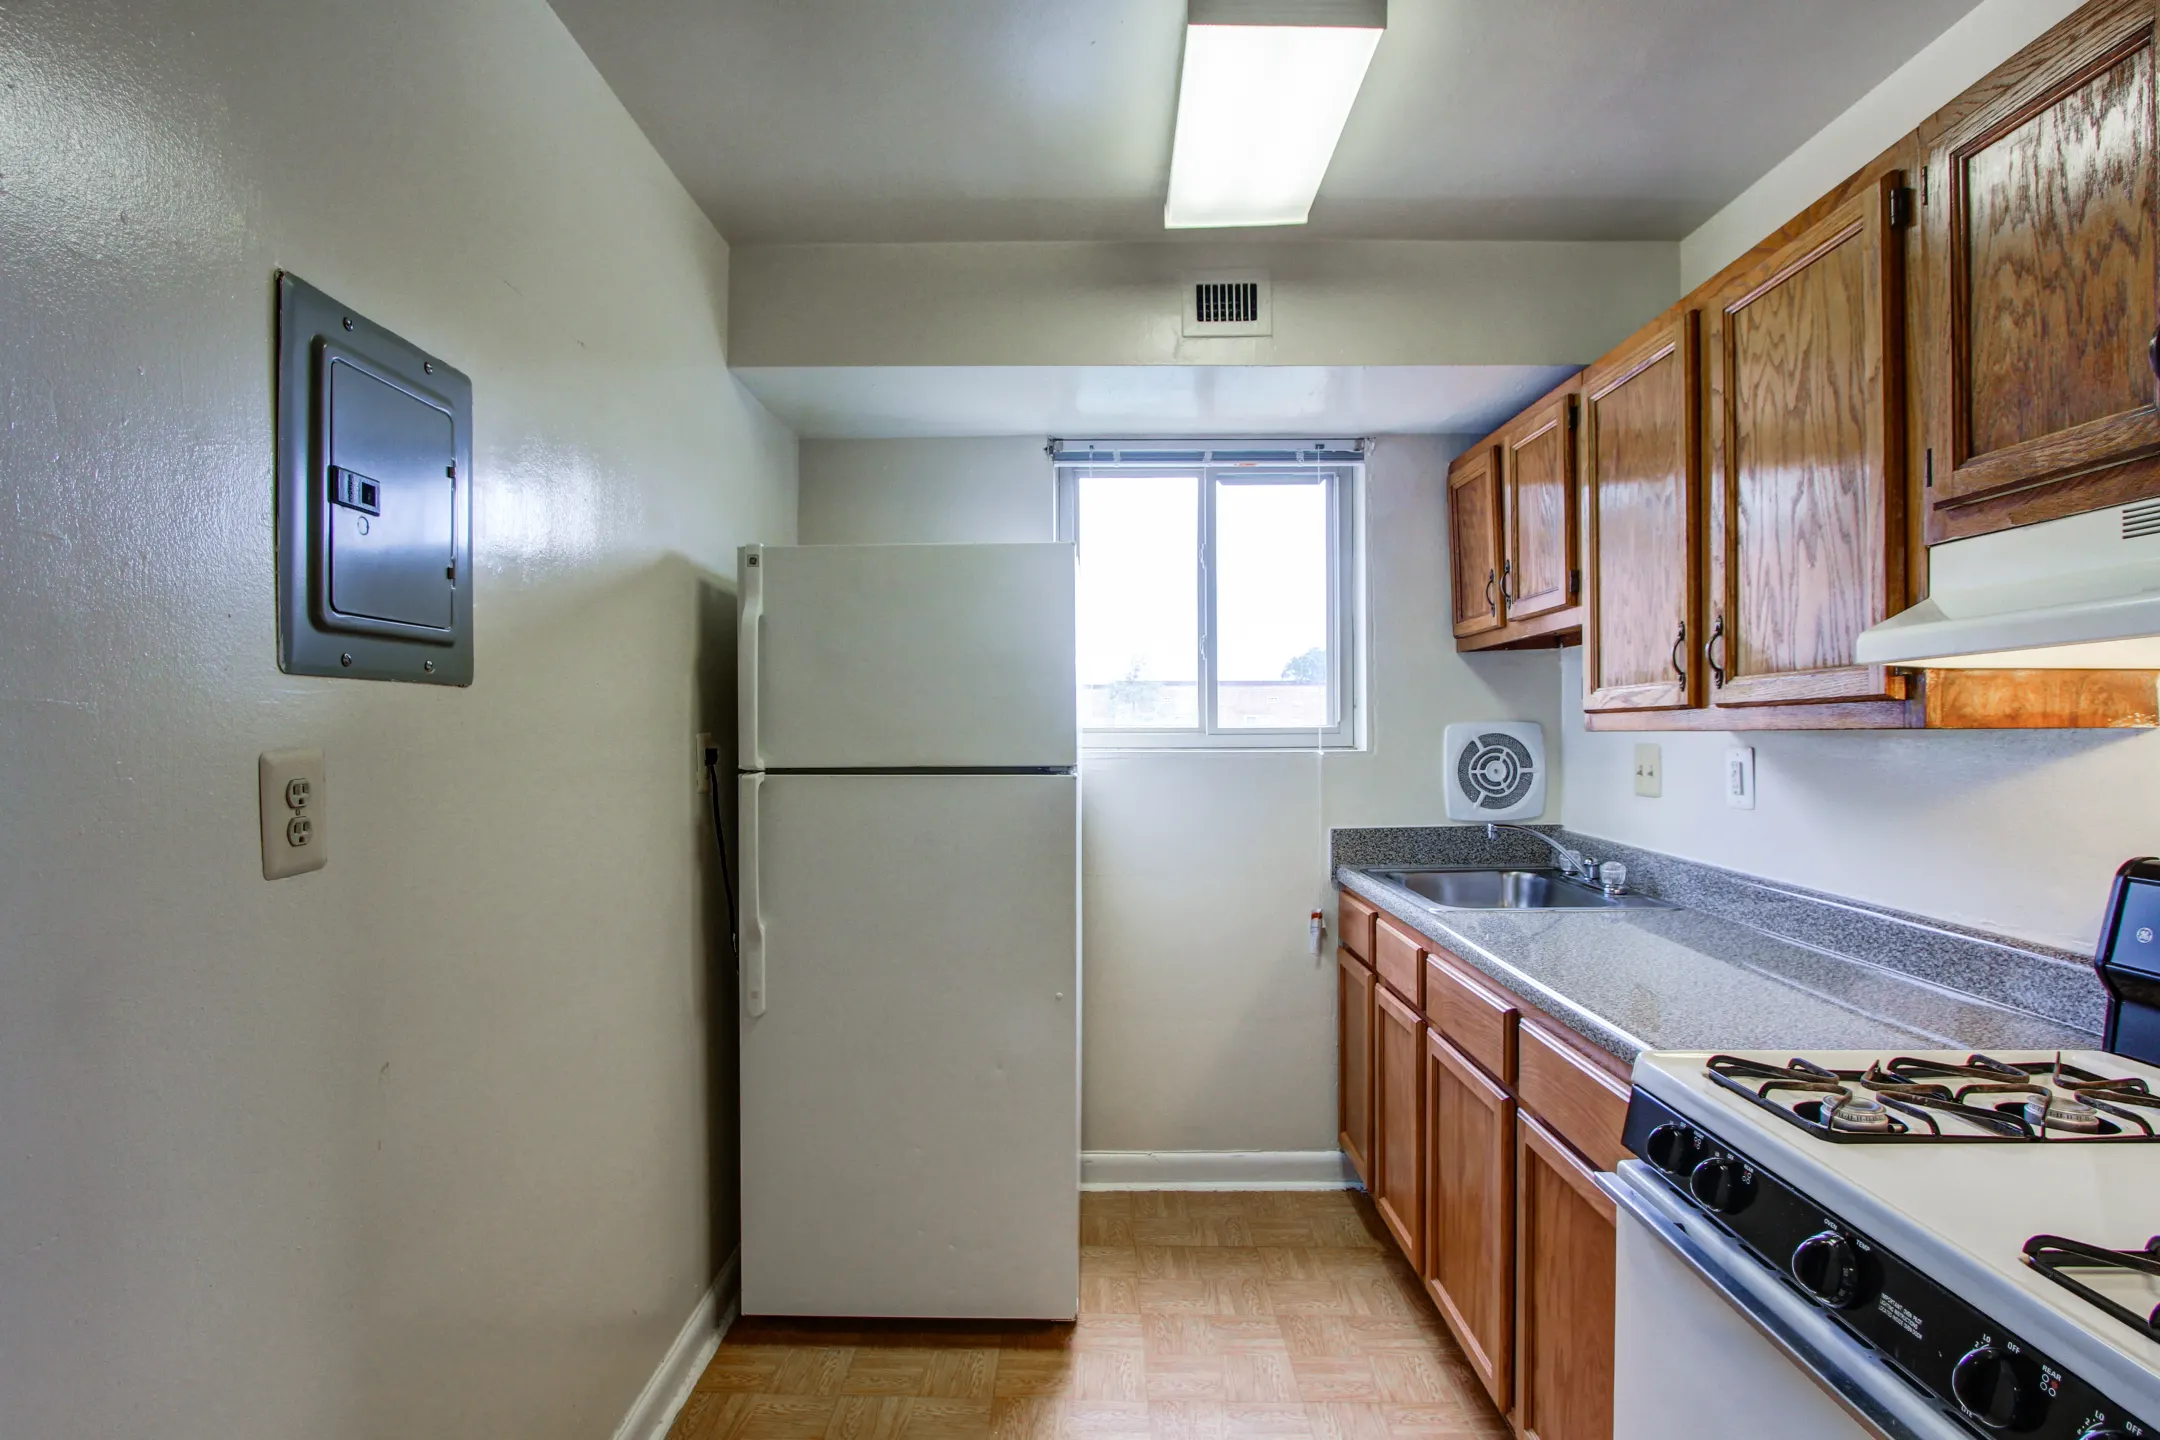 Kitchen - Thayer Terrace - Silver Spring, MD